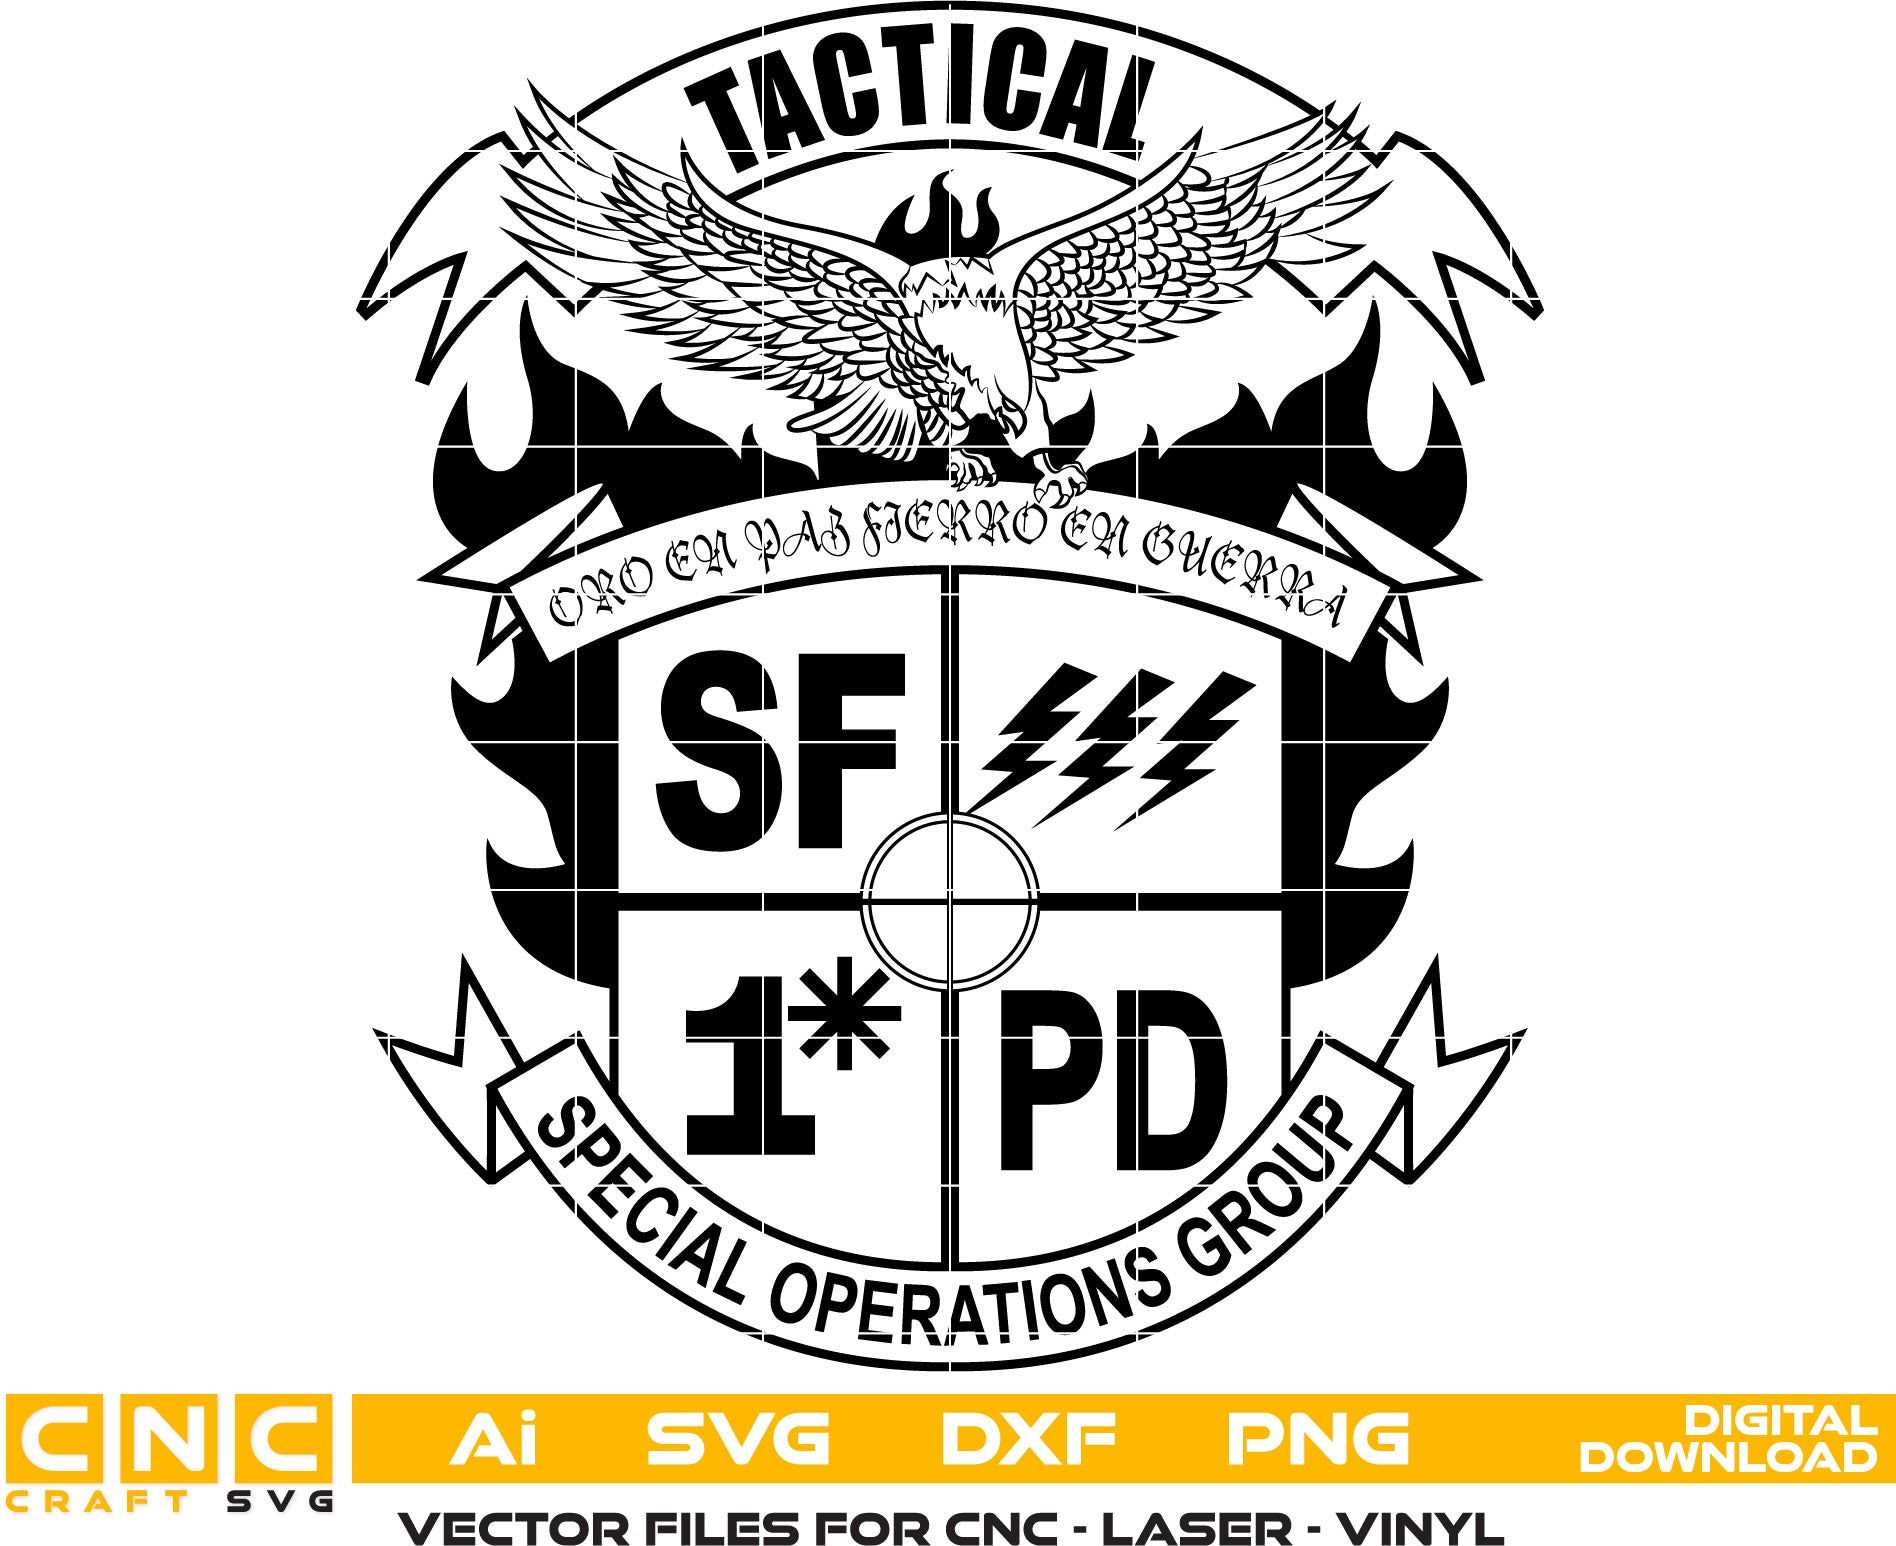 Tactical Special Operation Group Badge for Laser Engraving, Woodworking,Printing, CNC Router, Cricut, Ezecad etc.